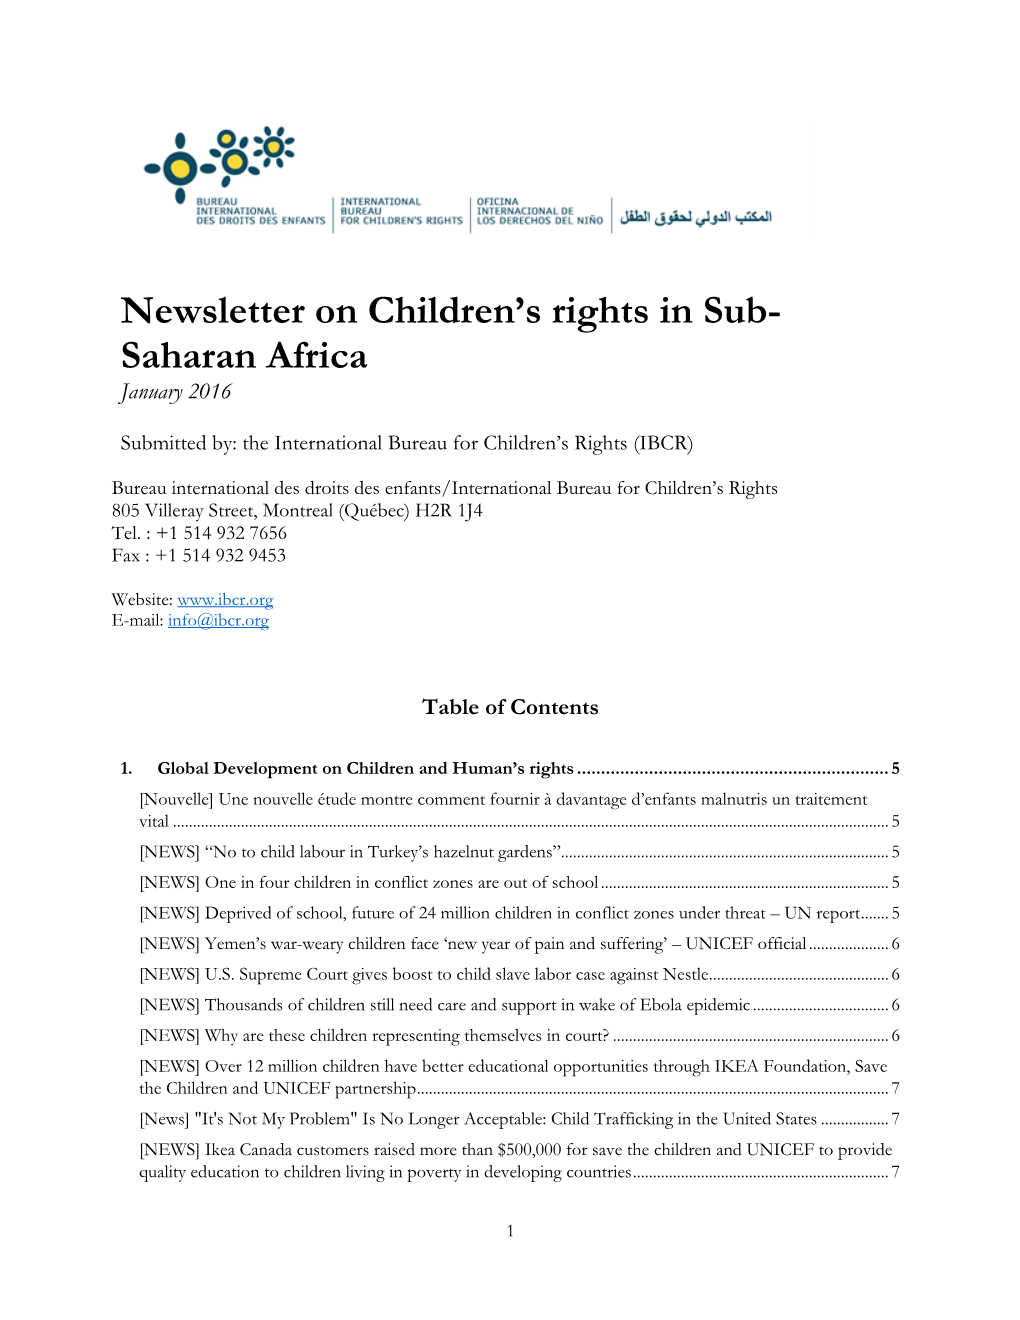 Newsletter on Children's Rights in Sub- Saharan Africa